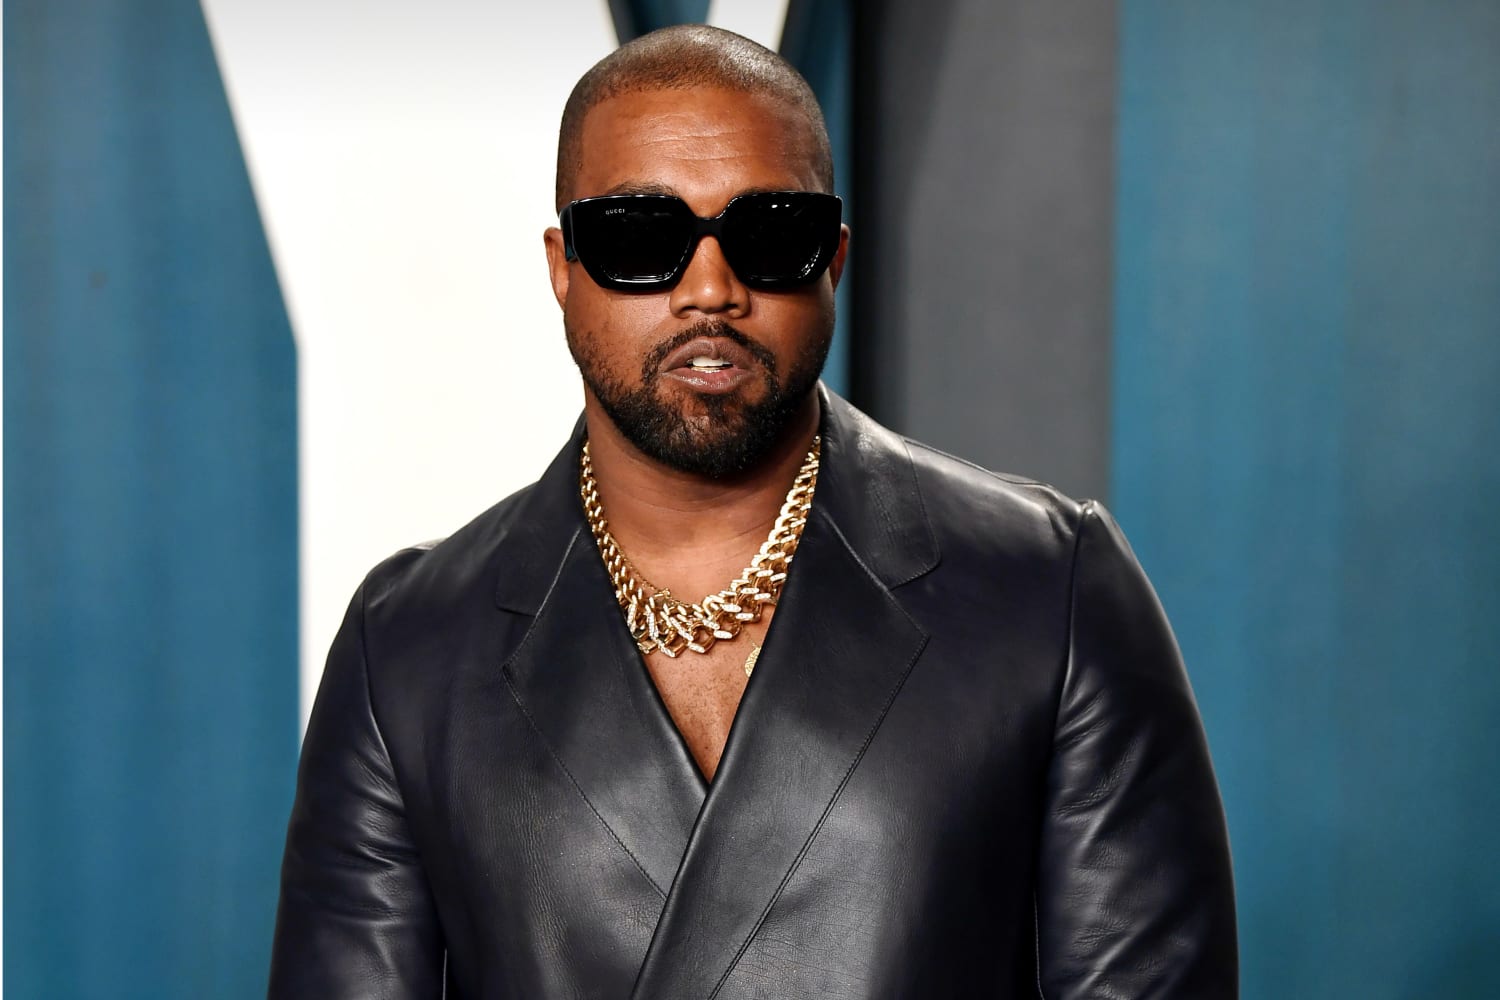 Kanye West considered suspect in battery investigation